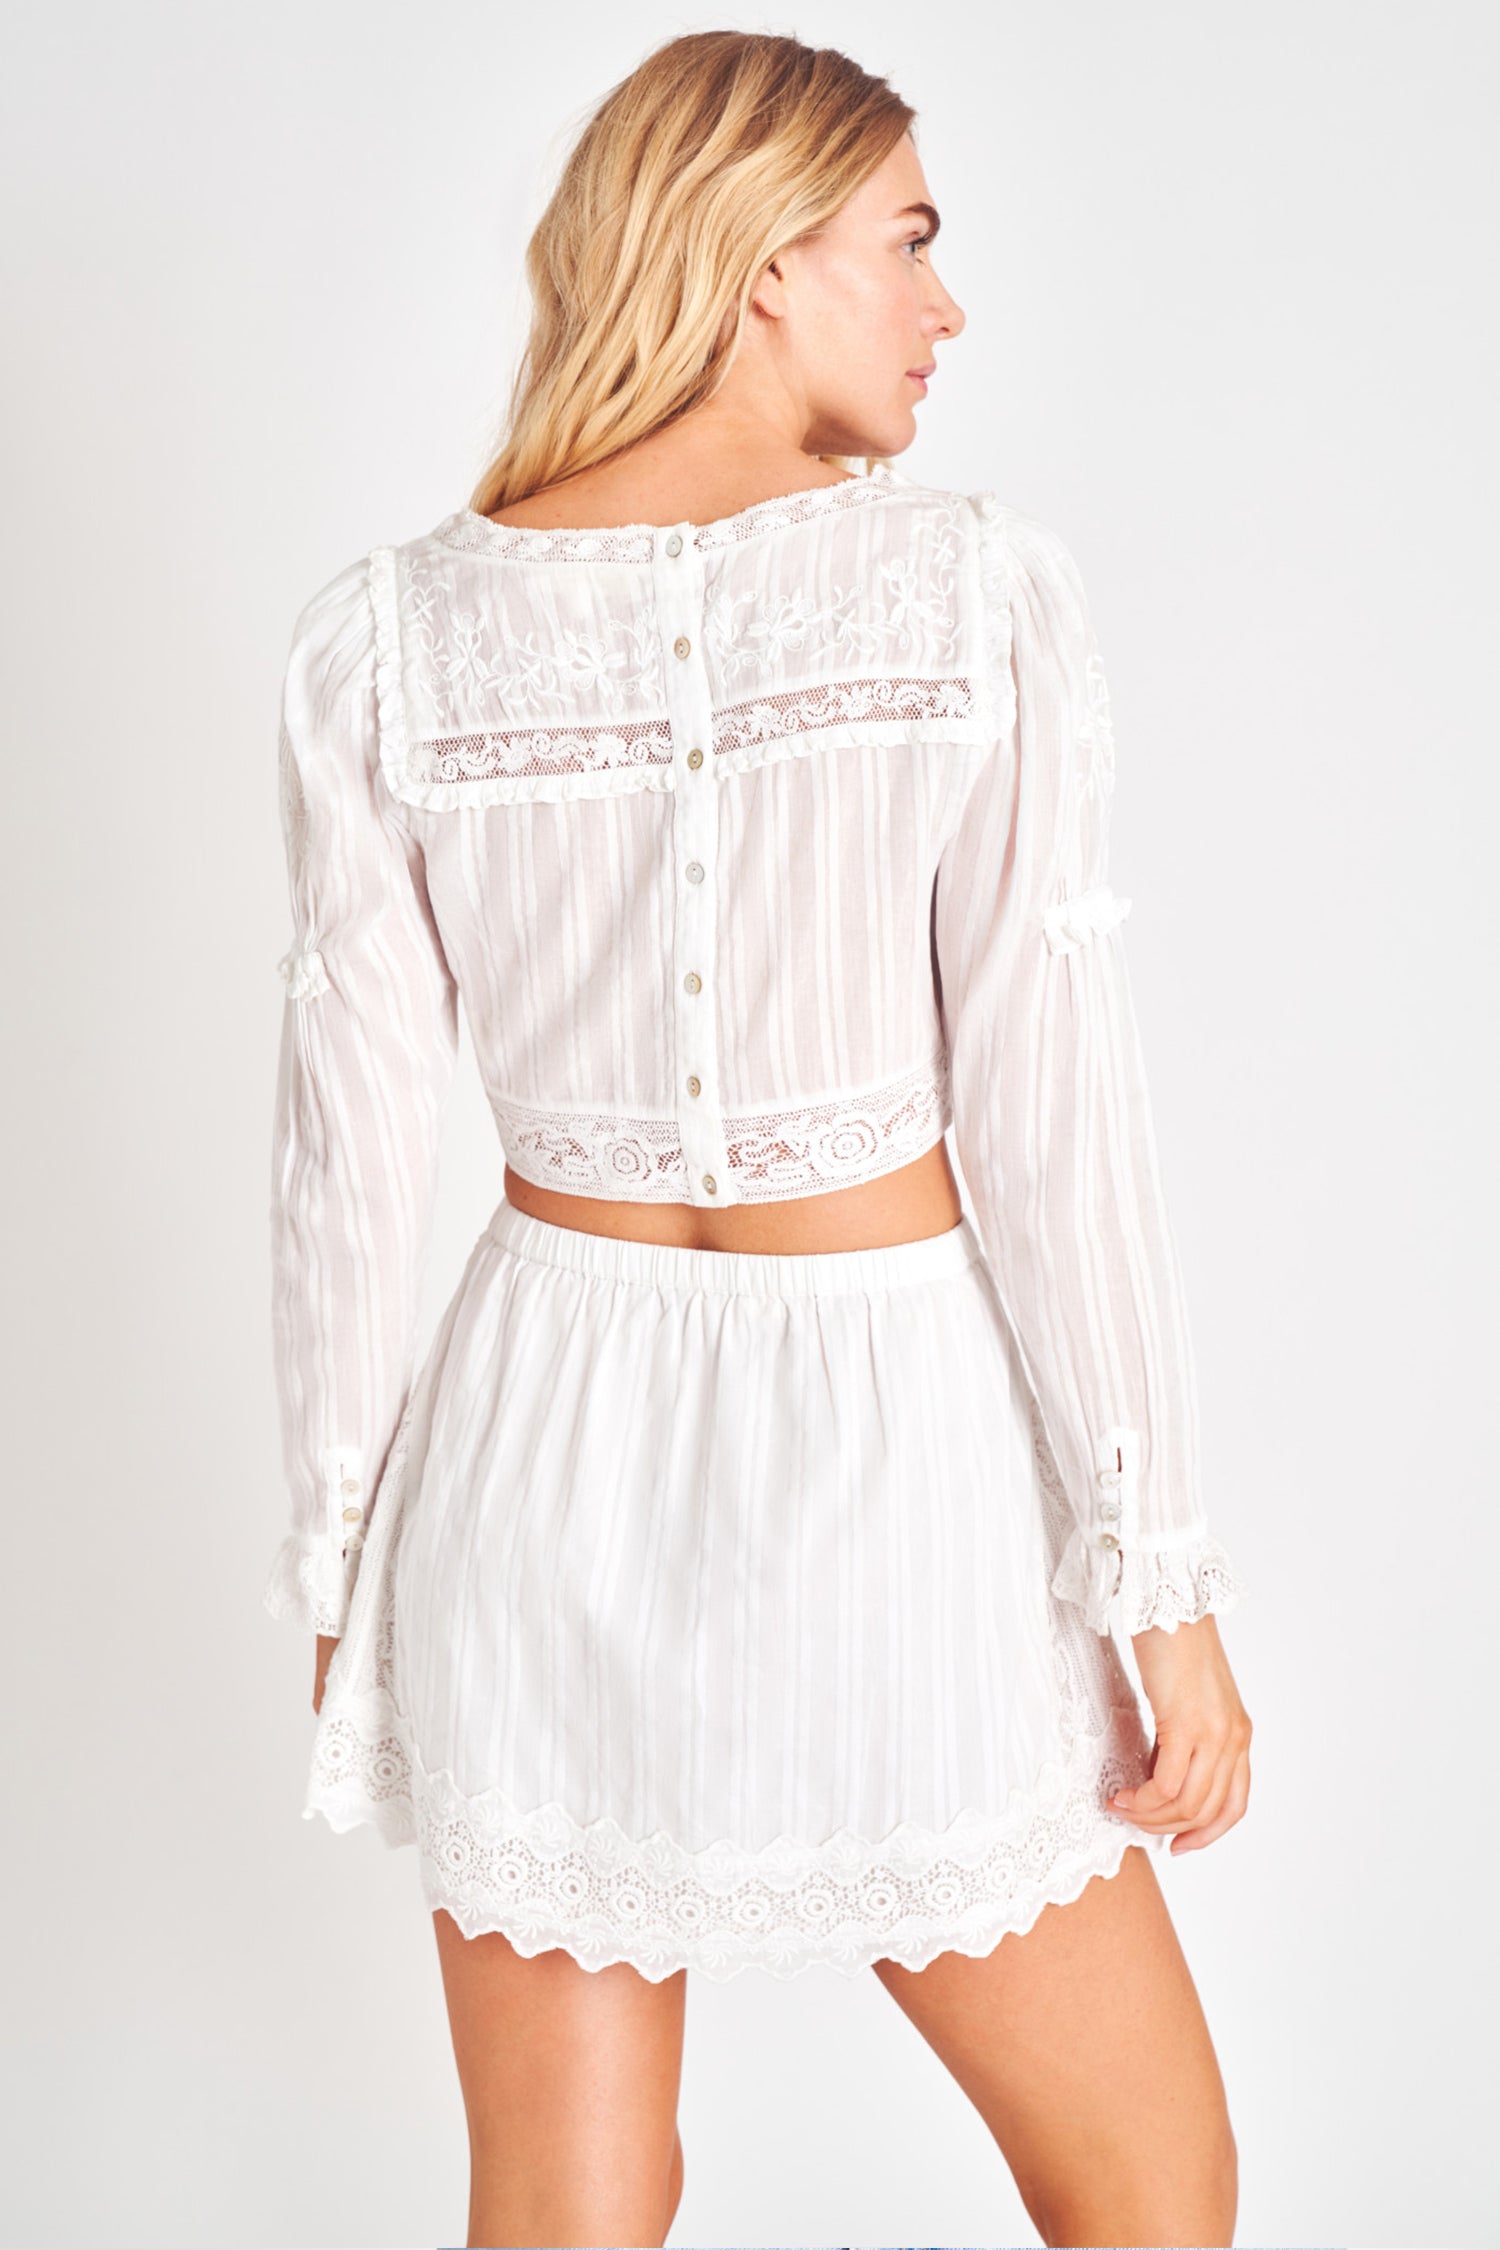 White embroidered long sleeve crop top.